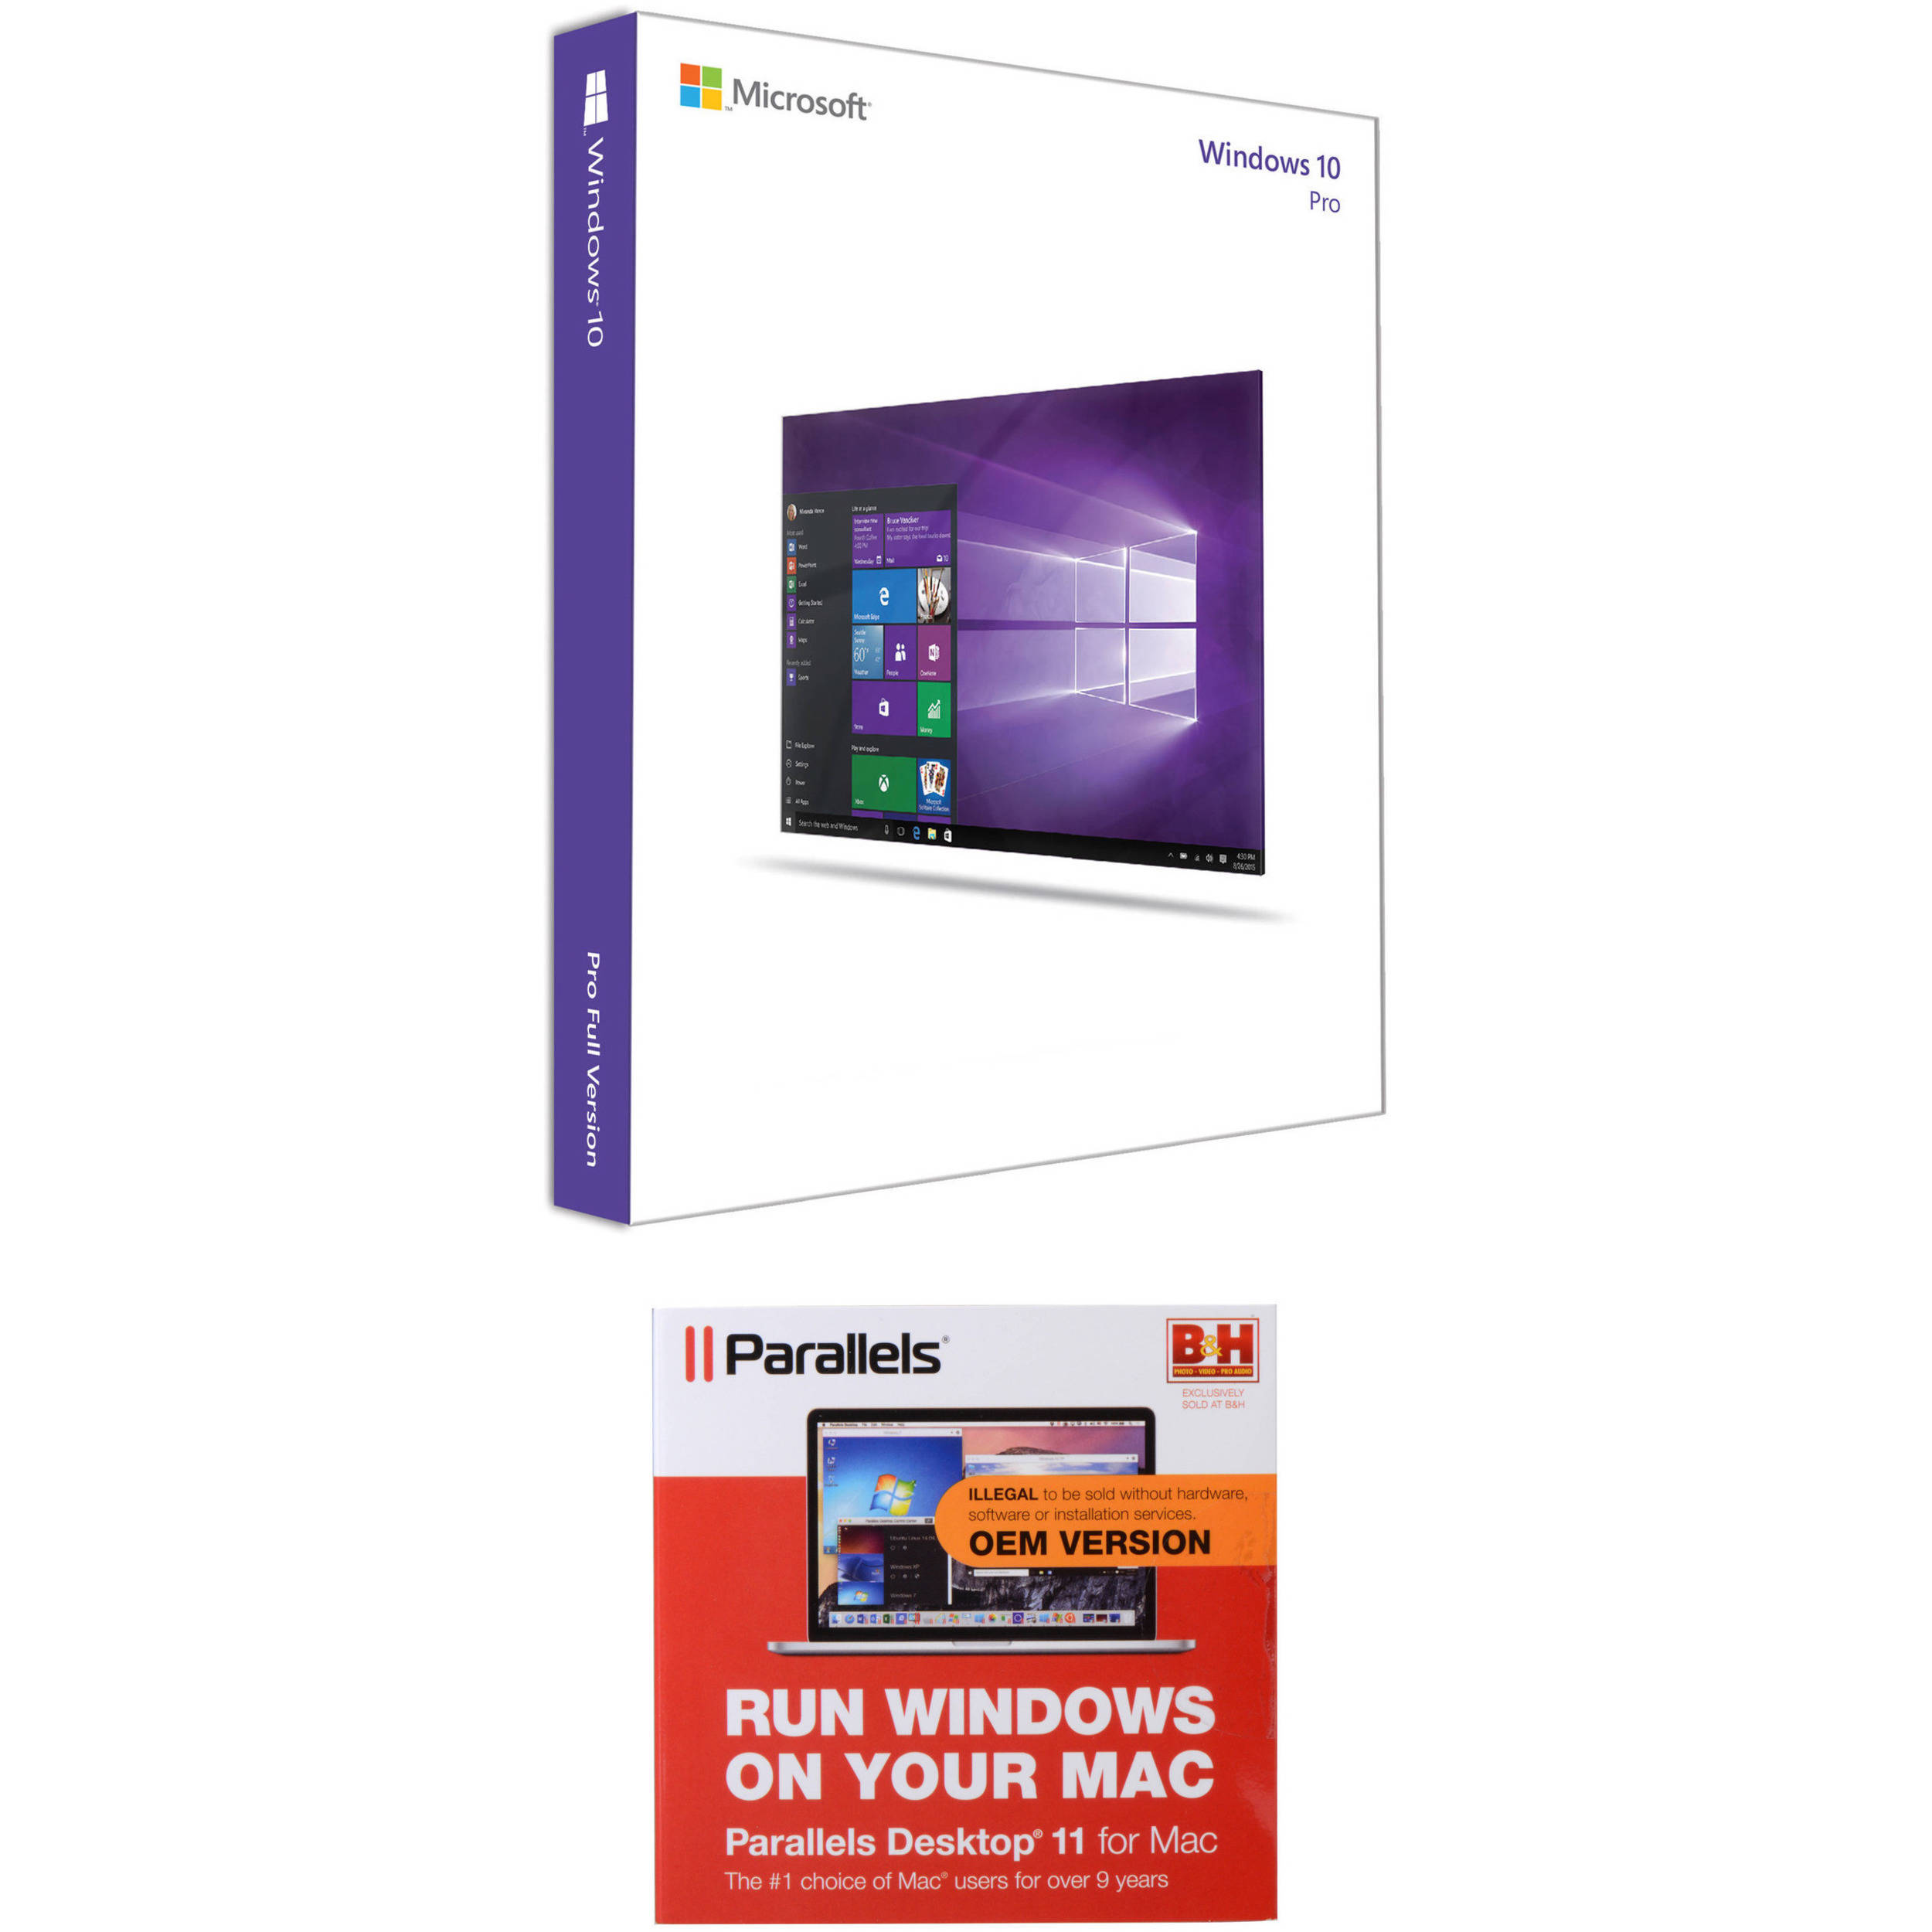 Windows 10 Free Download For Mac Using Parallels